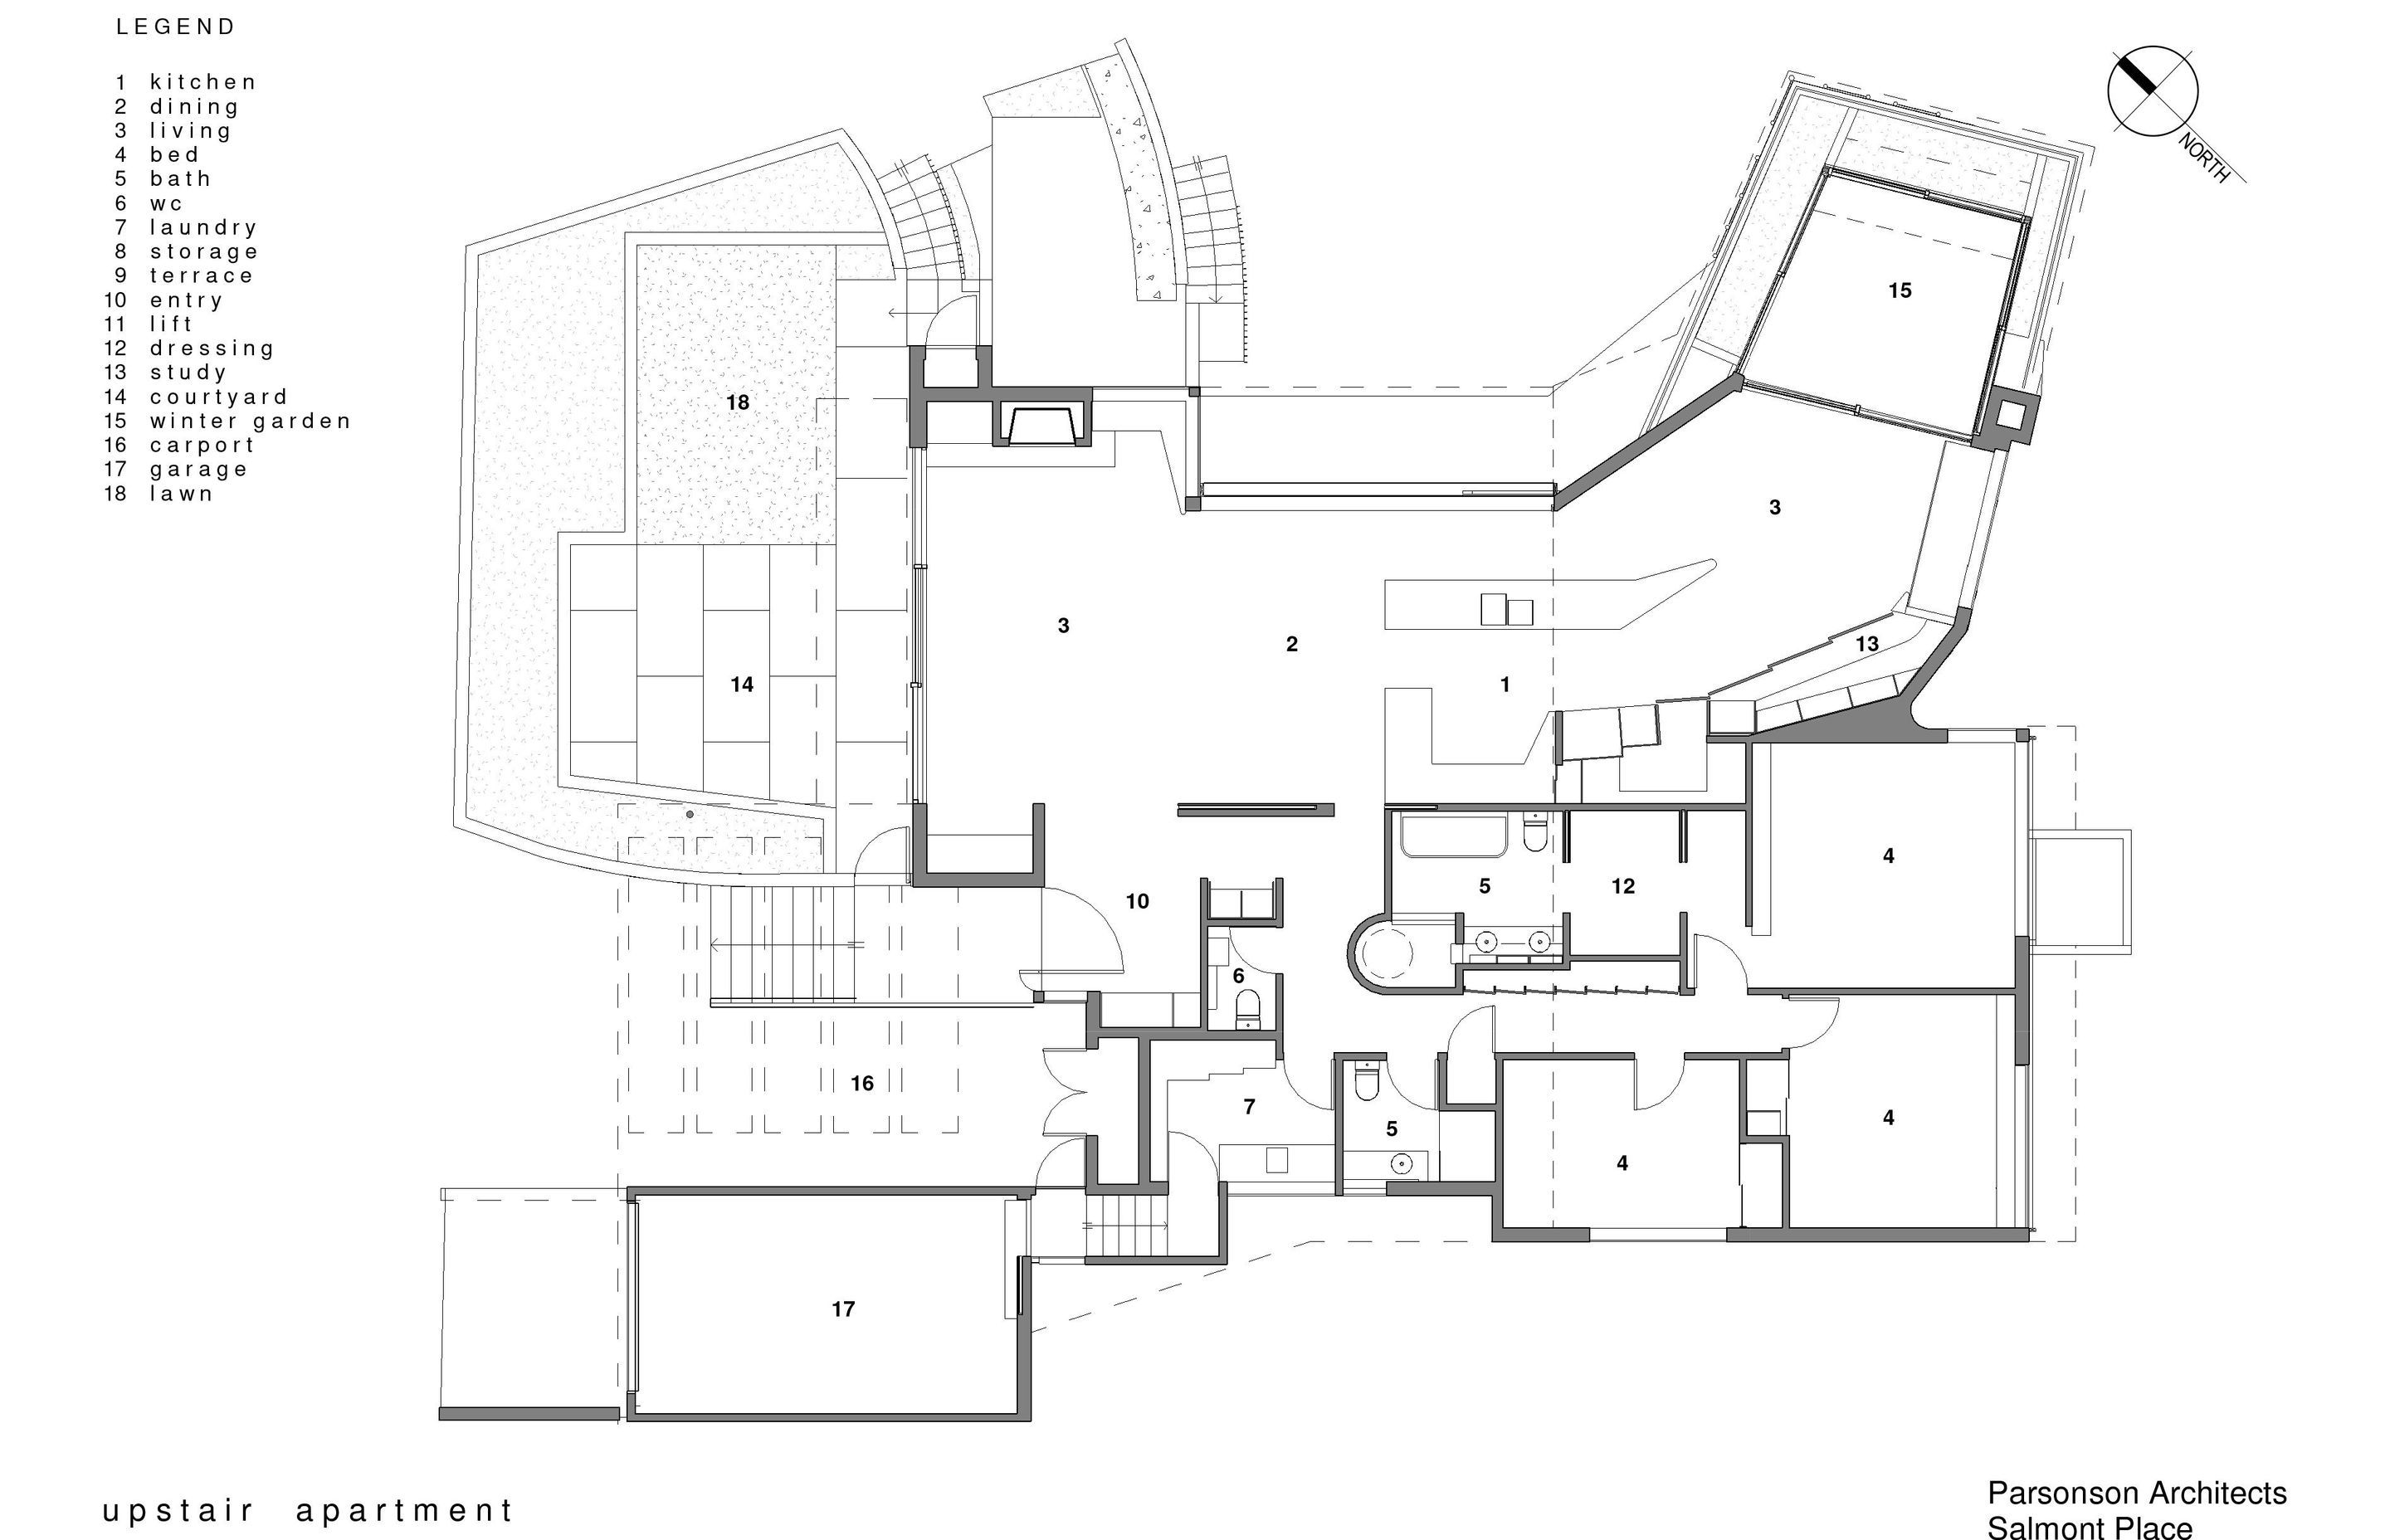 The plan of the upstairs apartment shows how the house is built to follow the sun from the north-facing winter garden (15) through the living and dining areas to the courtyard (14).